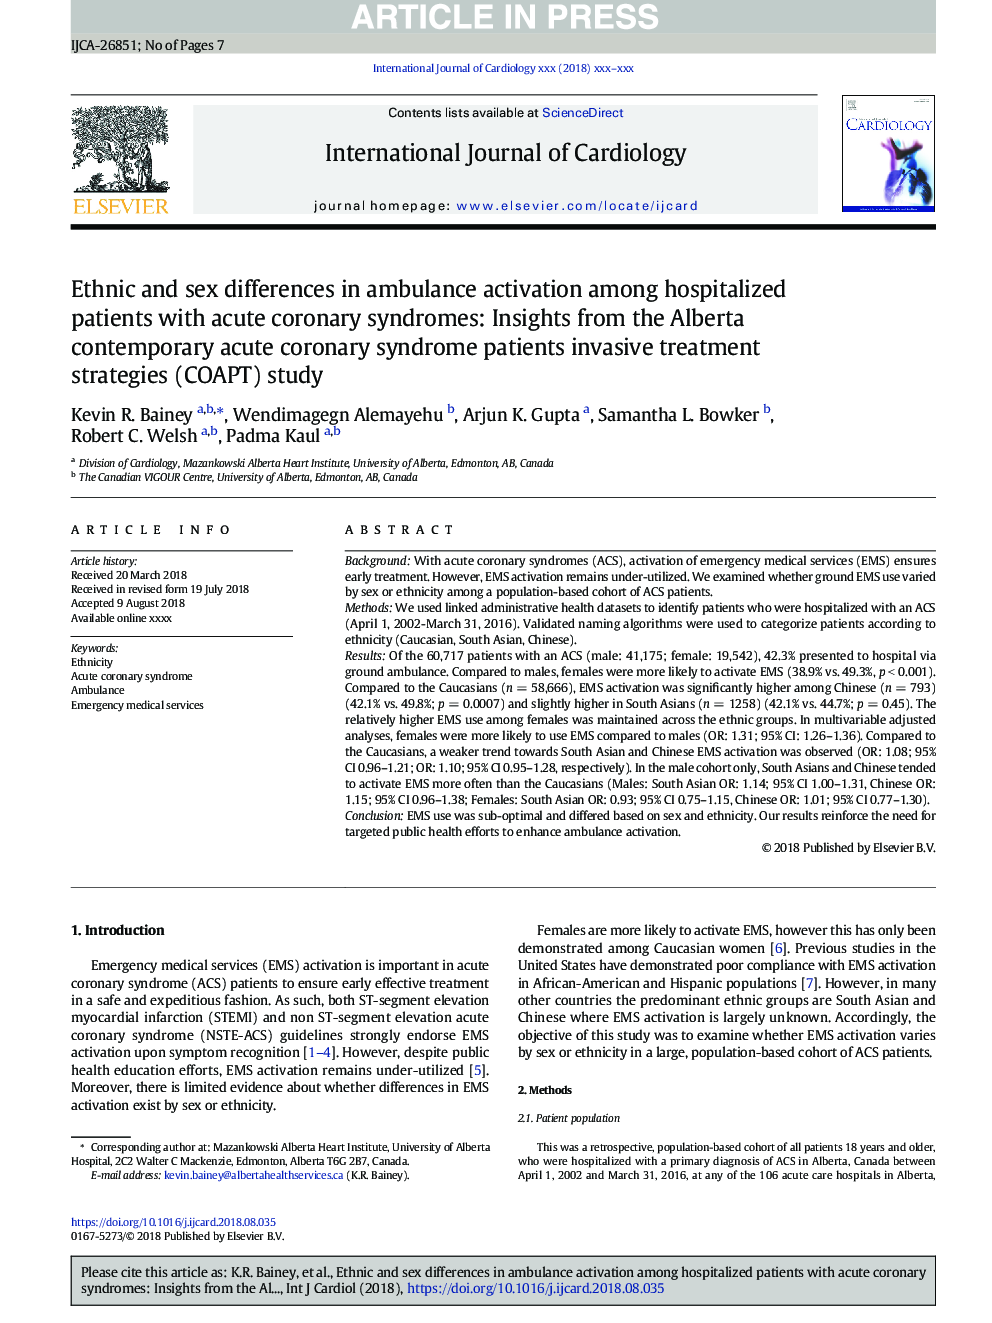 Ethnic and sex differences in ambulance activation among hospitalized patients with acute coronary syndromes: Insights from the Alberta contemporary acute coronary syndrome patients invasive treatment strategies (COAPT) study